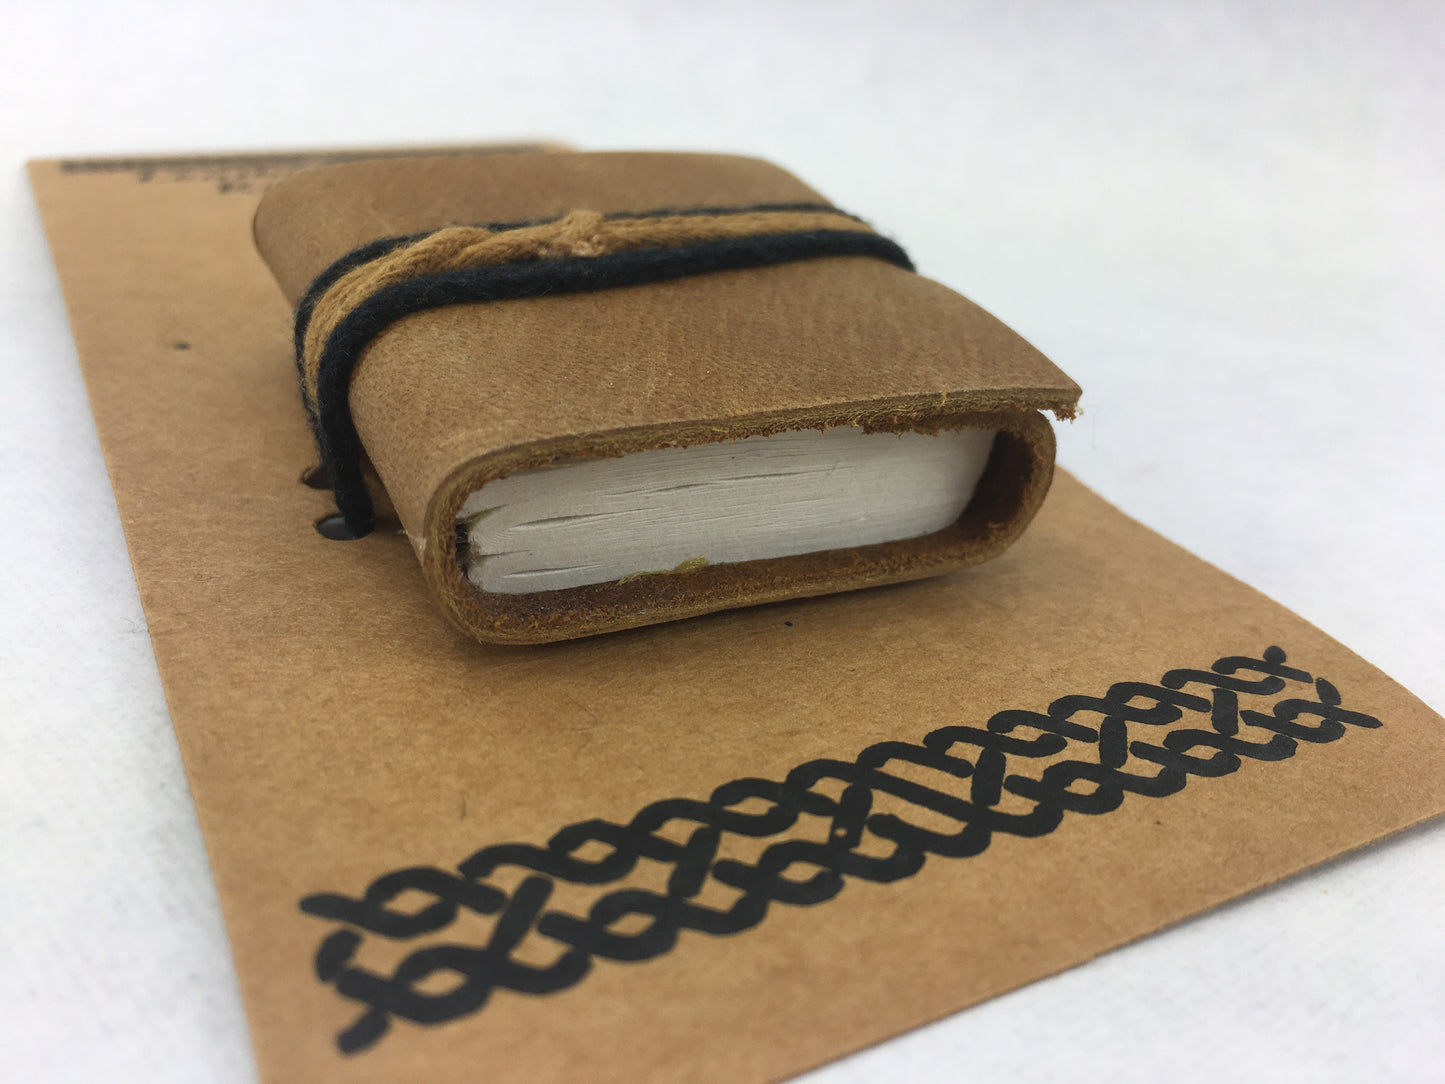 Miniature book key ring- Quality Handmade Leather Journal- ACID FREE- THICK 100% Cotton paper- TBBLJ7